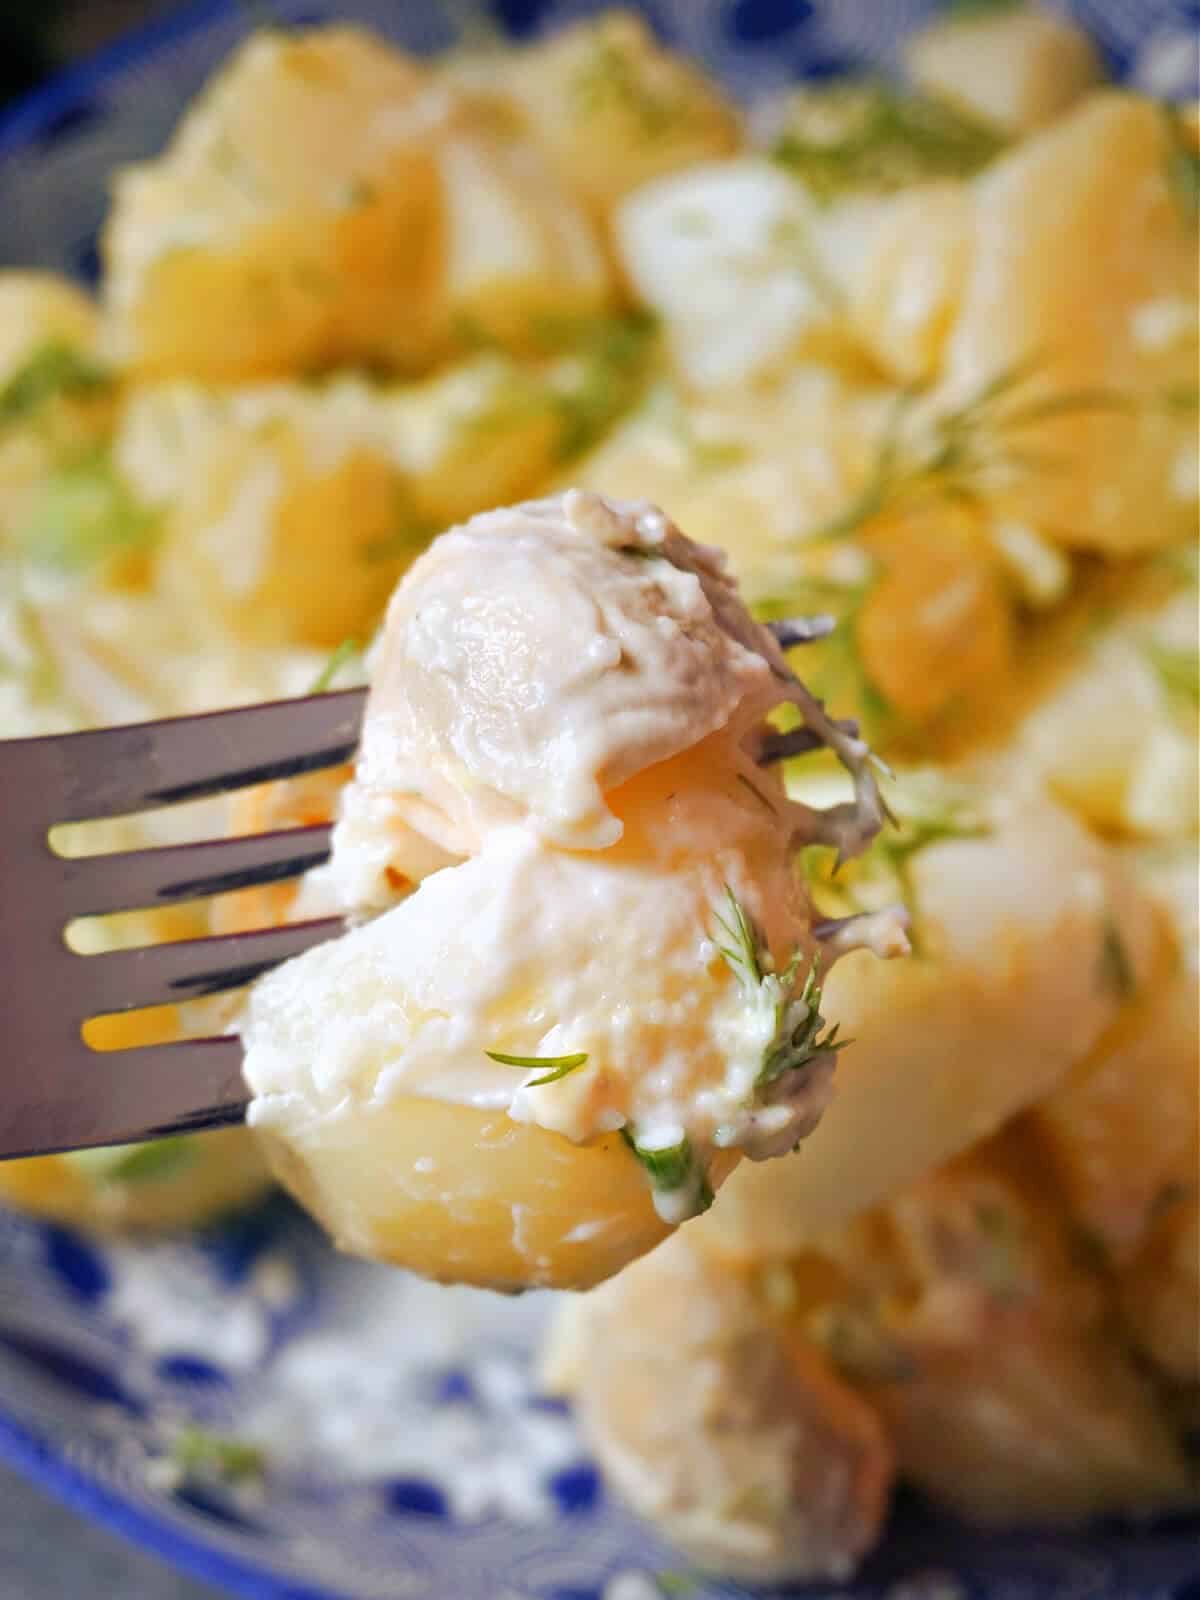 Close-up shoot of a forkful of potato salad with eggs.